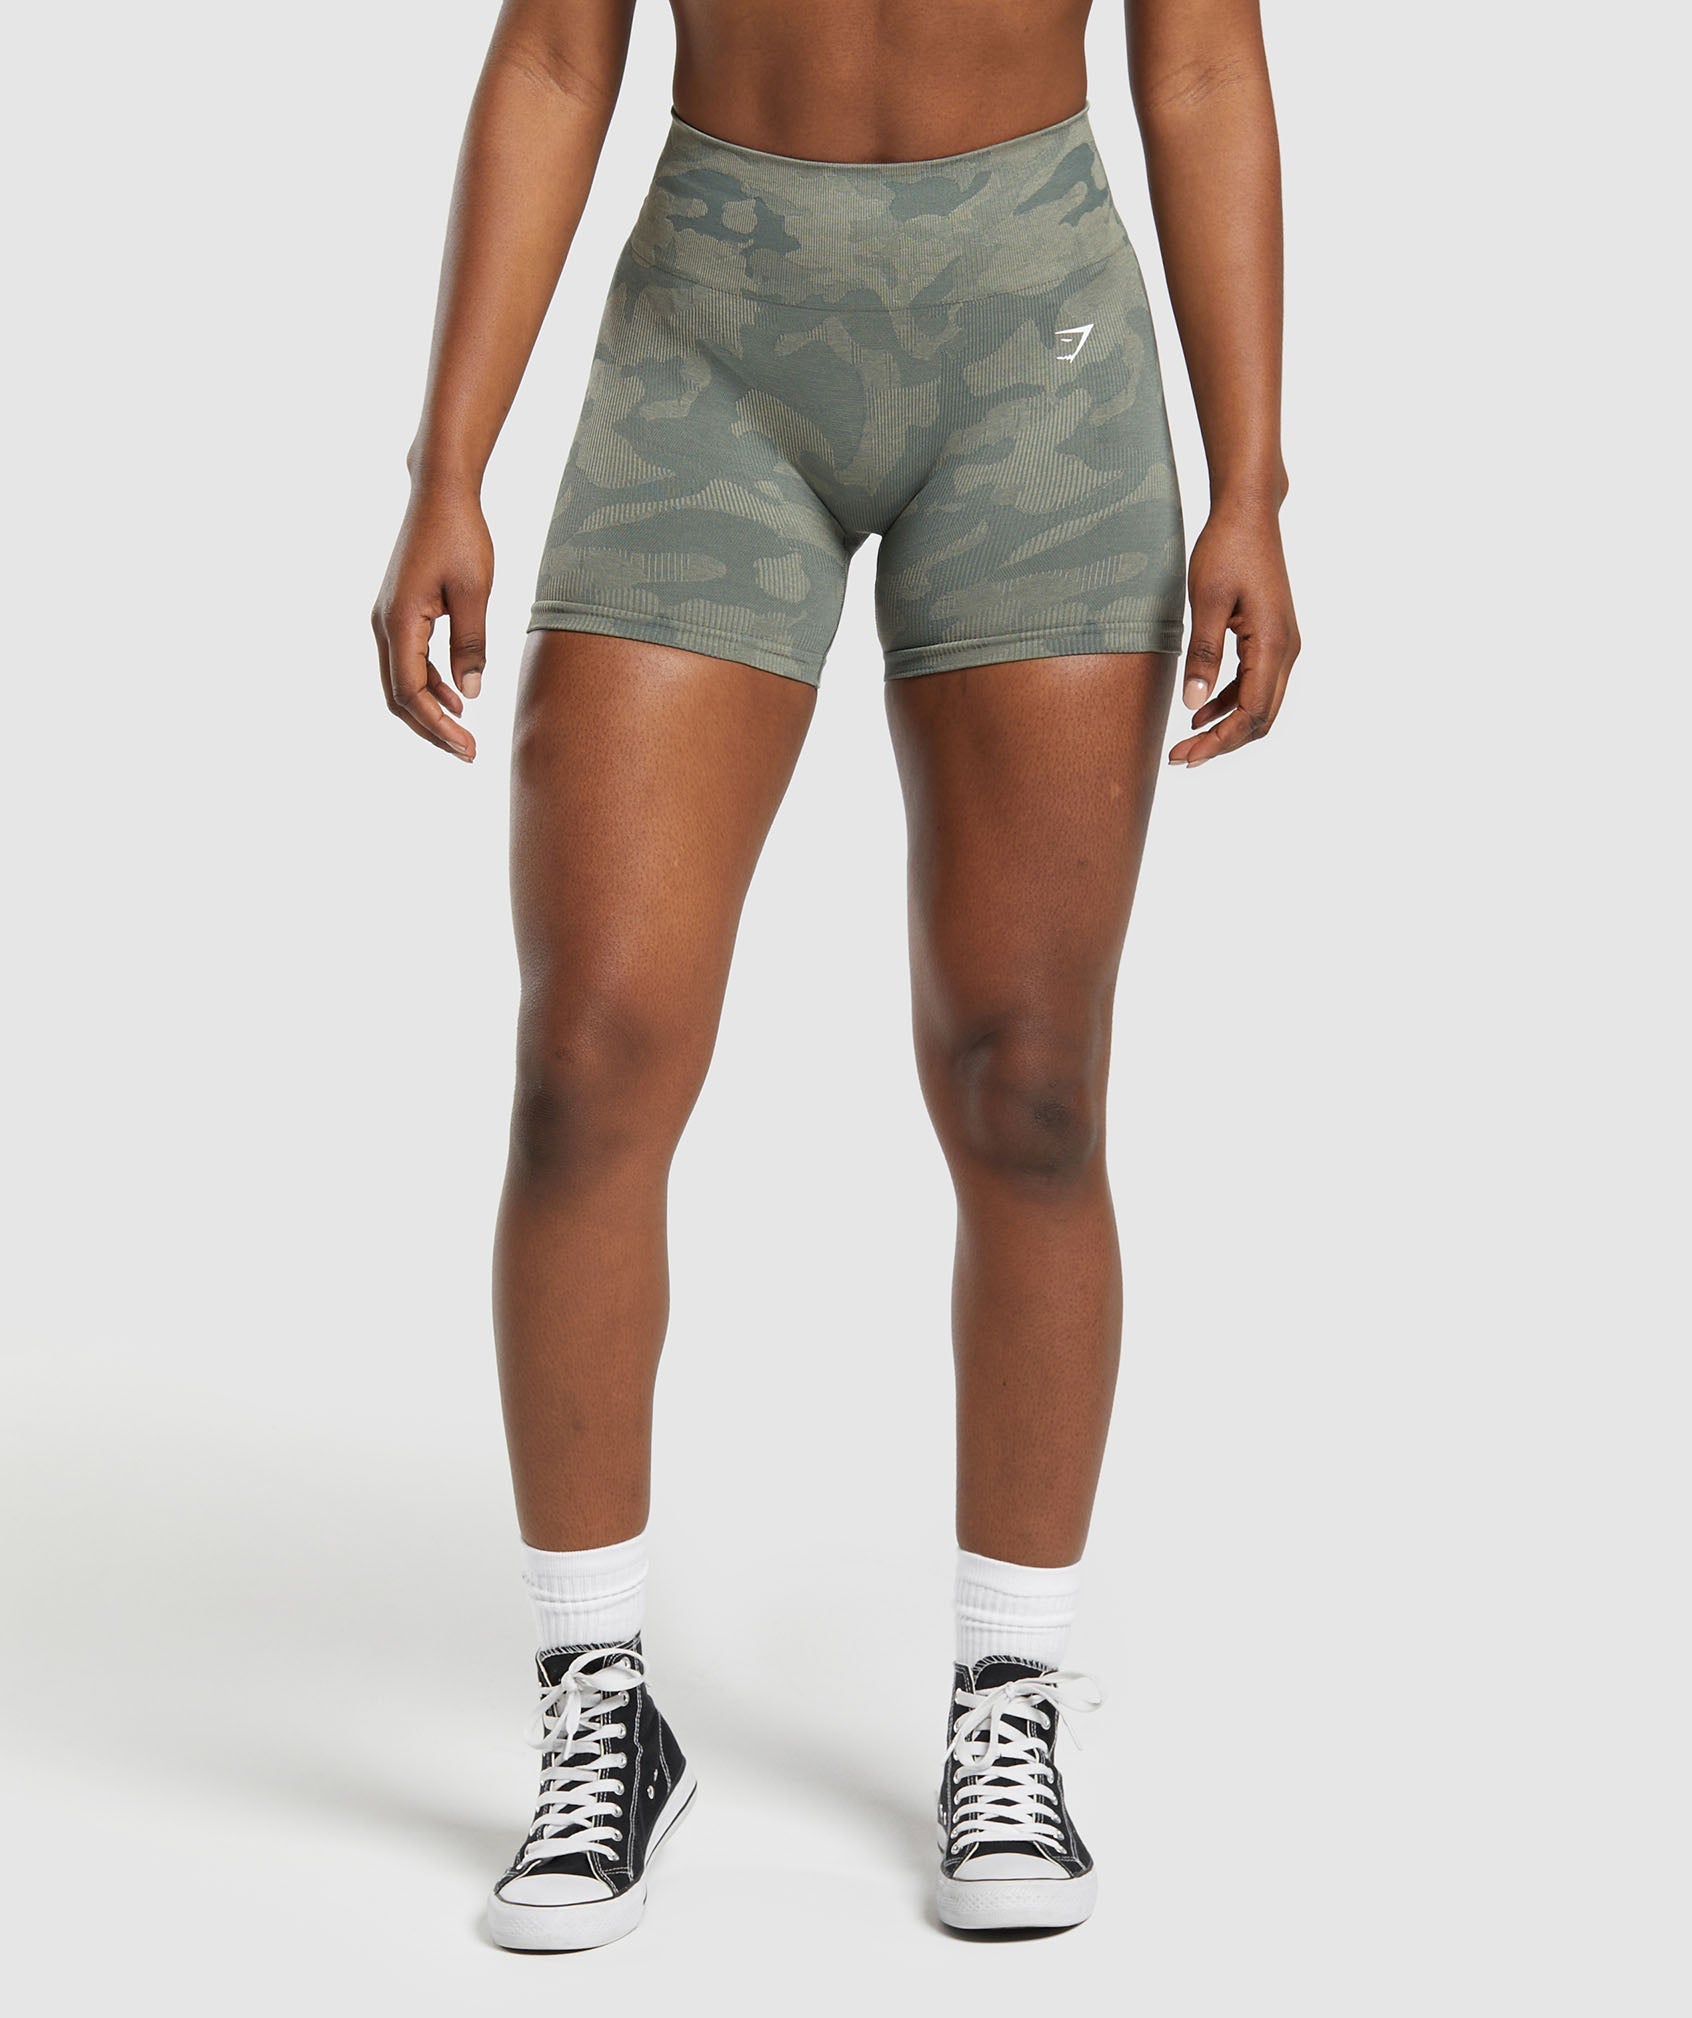 Adapt Camo Seamless Shorts in Unit Green/Chalk Green - view 1